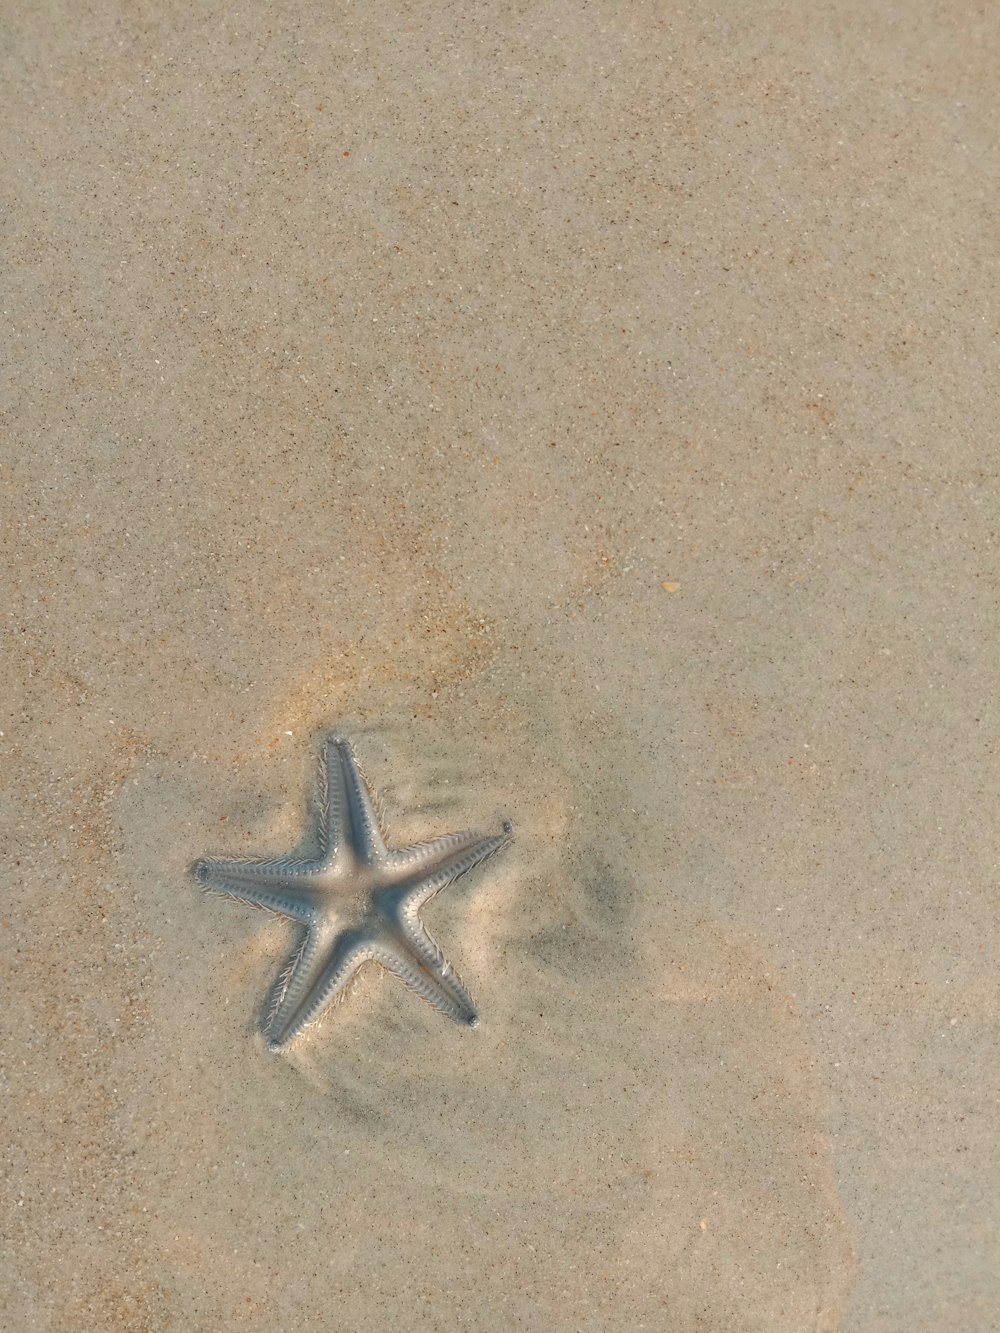 silver star on gray sand